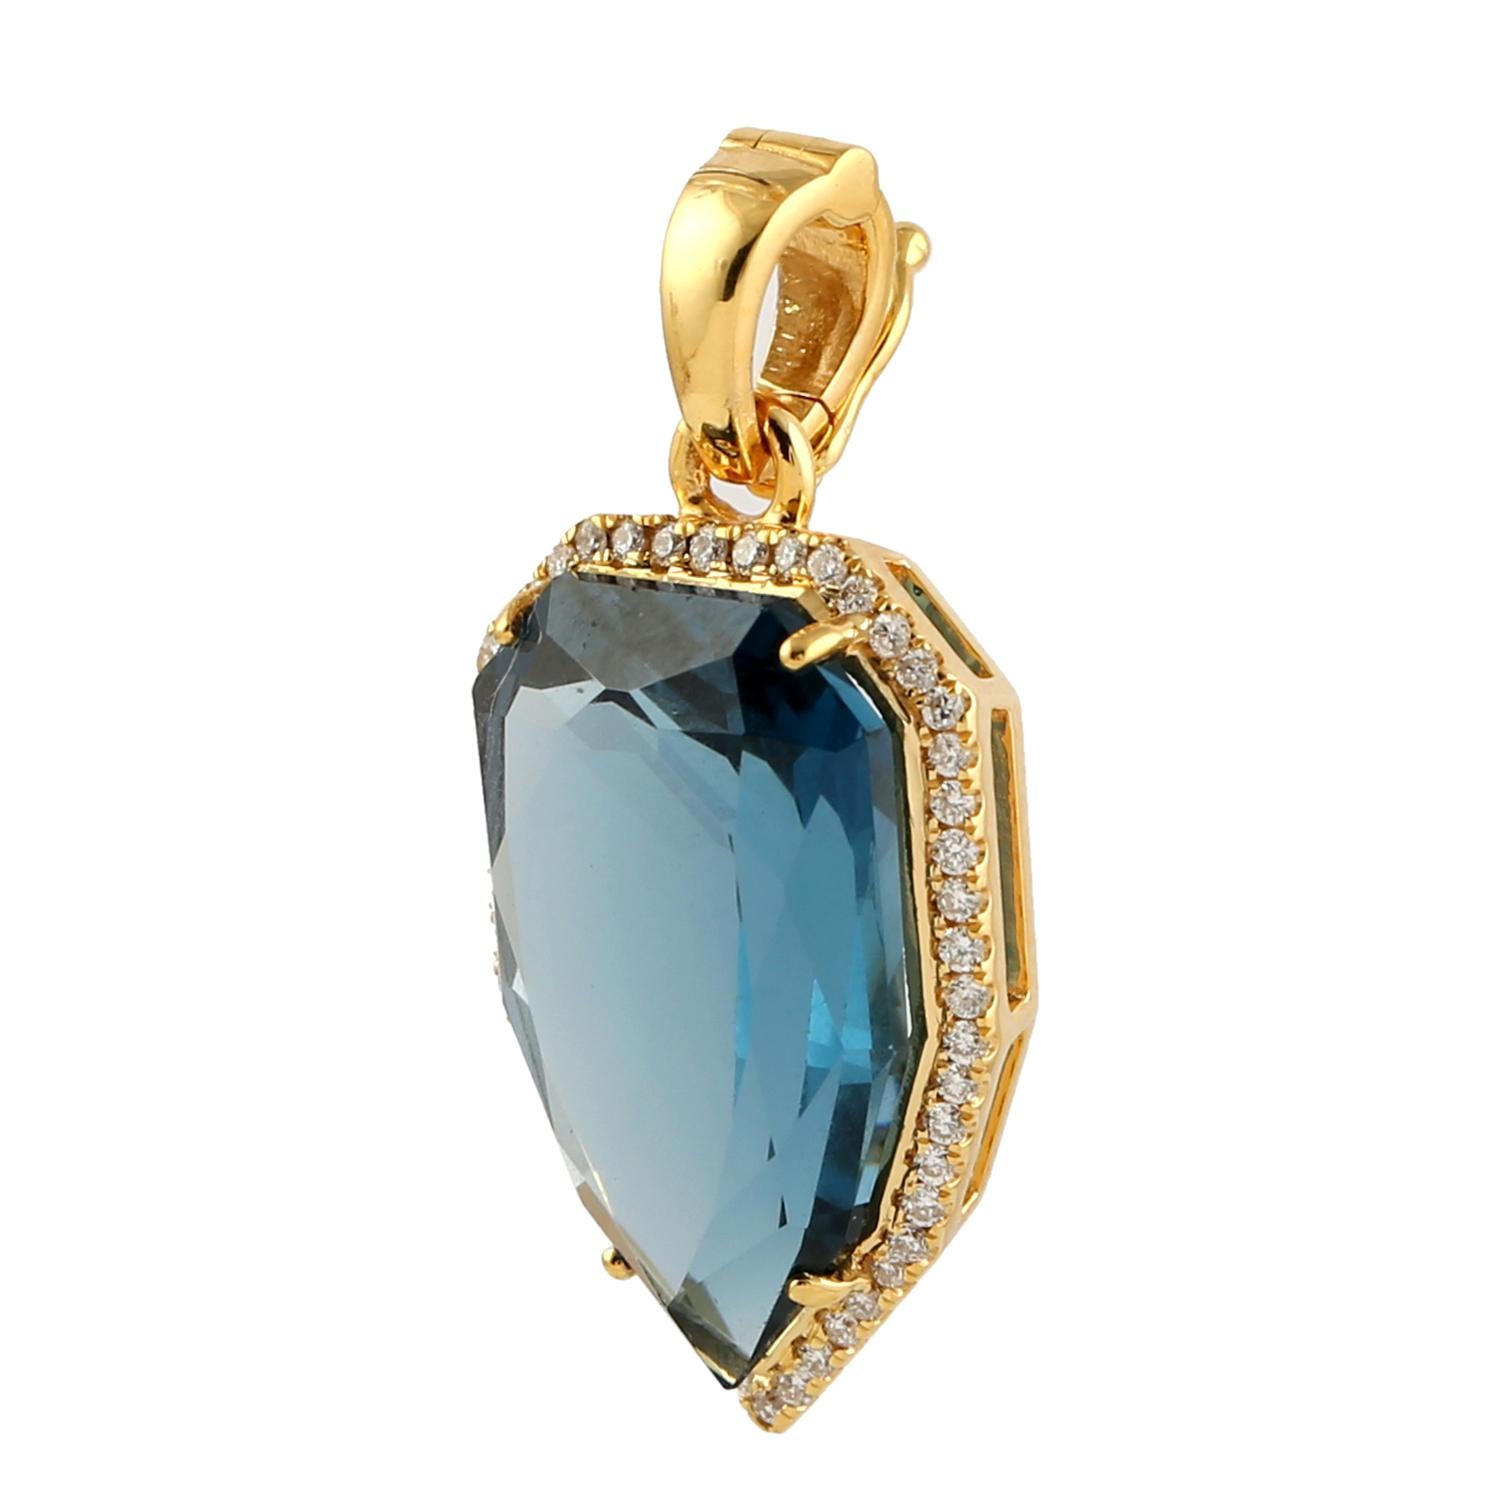 This beautiful necklace is crafted in 14K gold, 11.02 carats blue topaz and .21 carat diamonds. Also available matching ring

FOLLOW  MEGHNA JEWELS storefront to view the latest collection & exclusive pieces.  Meghna Jewels is proudly rated as a Top